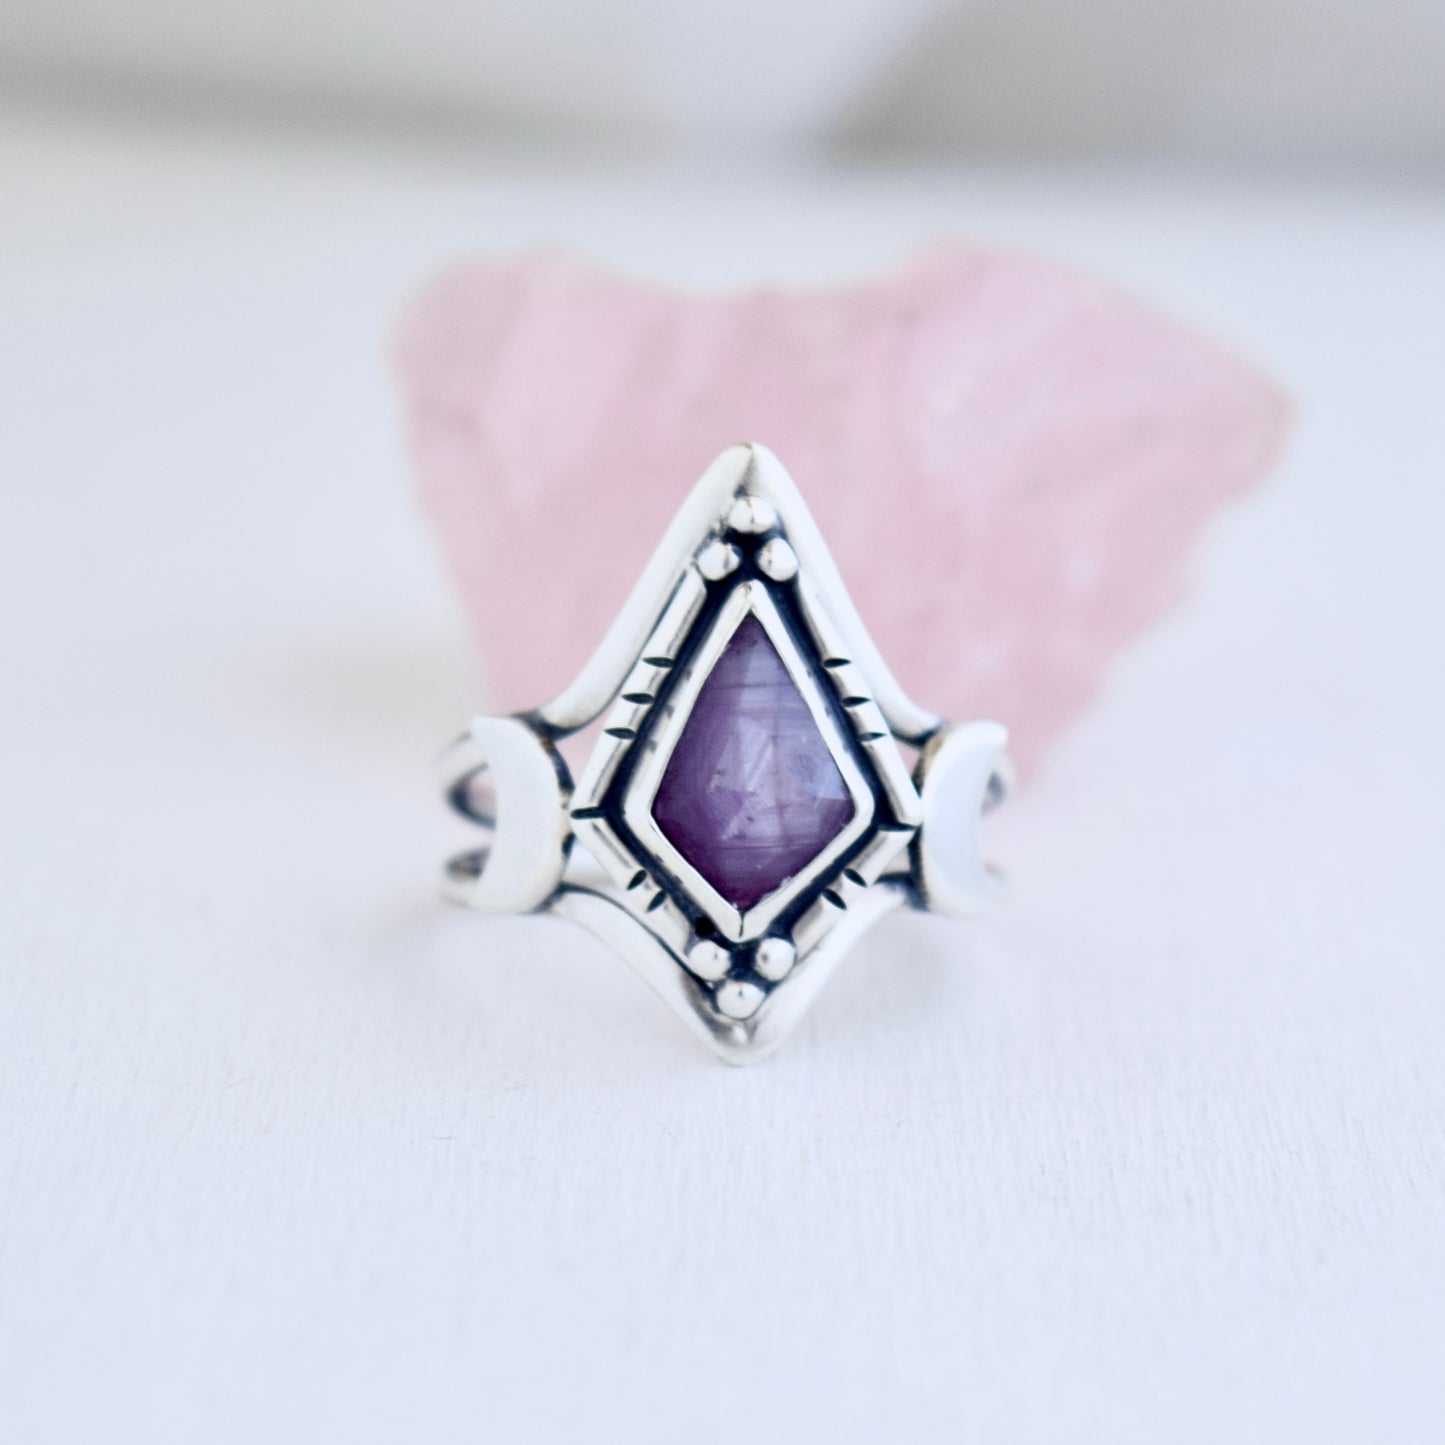 North Star Ring with Raspberry Sapphire size 9